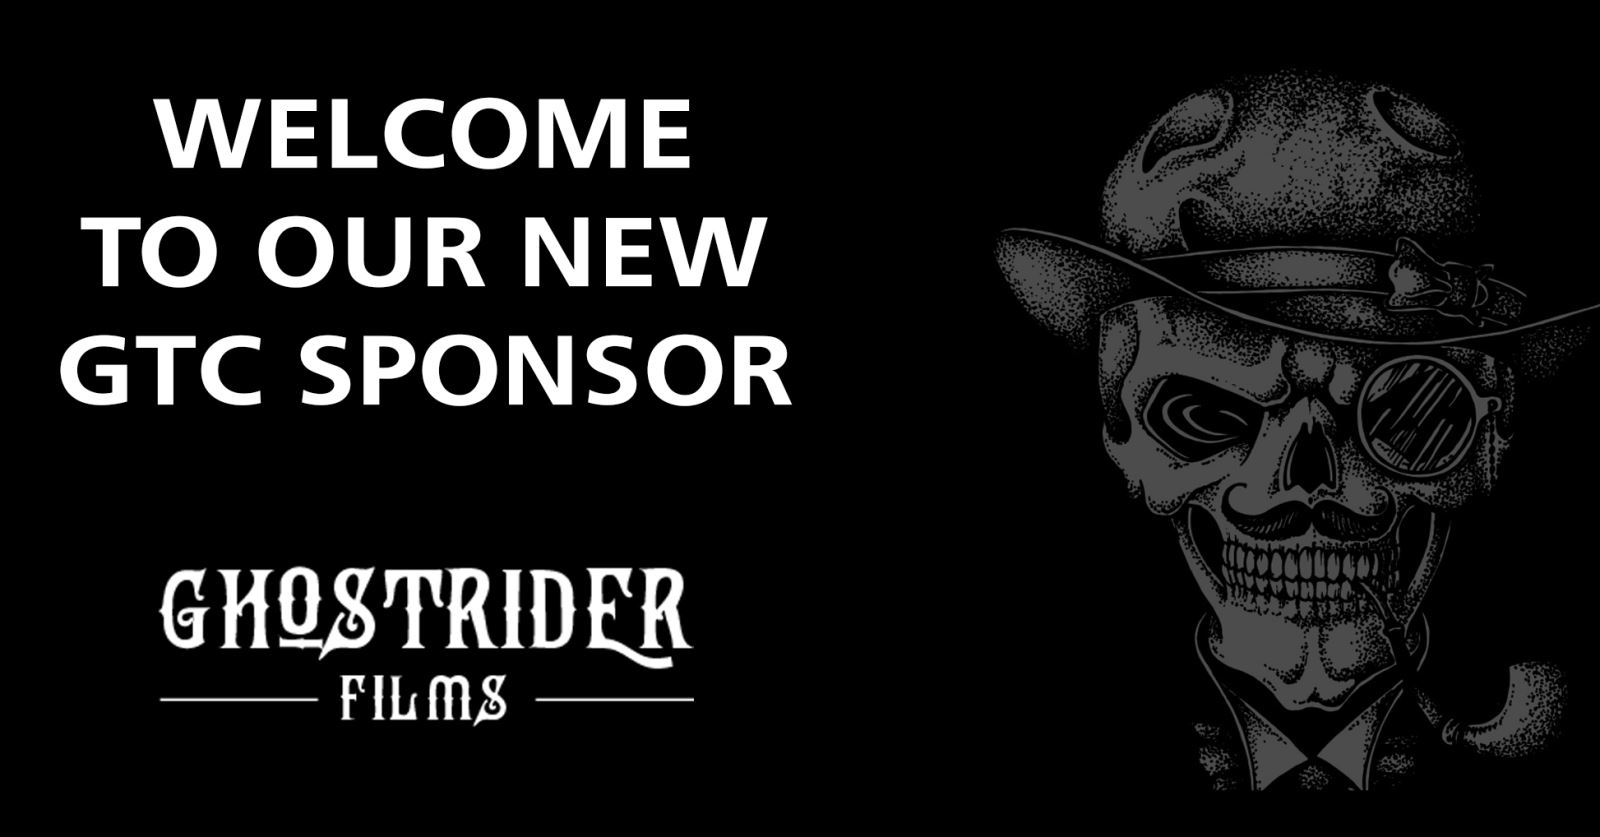 A warm welcome to our new GTC Sponsor - Ghostrider Films